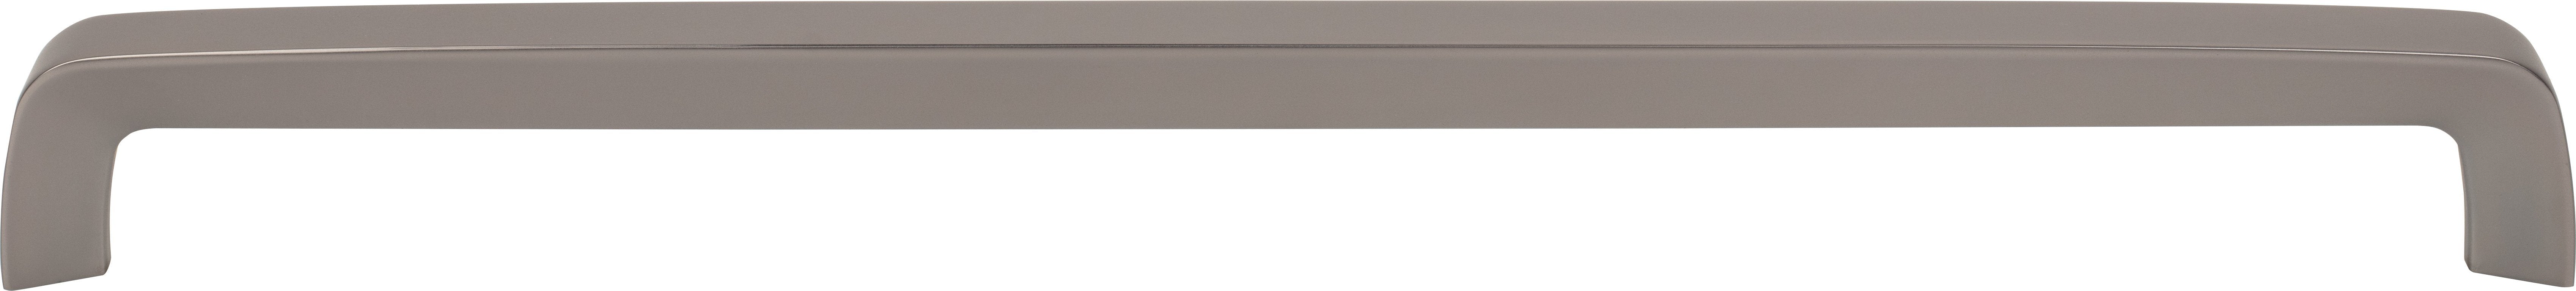 Top Knobs M2186 12-5/8in (320mm) Tapered Bar Pull Ash Gray - KnobDepot